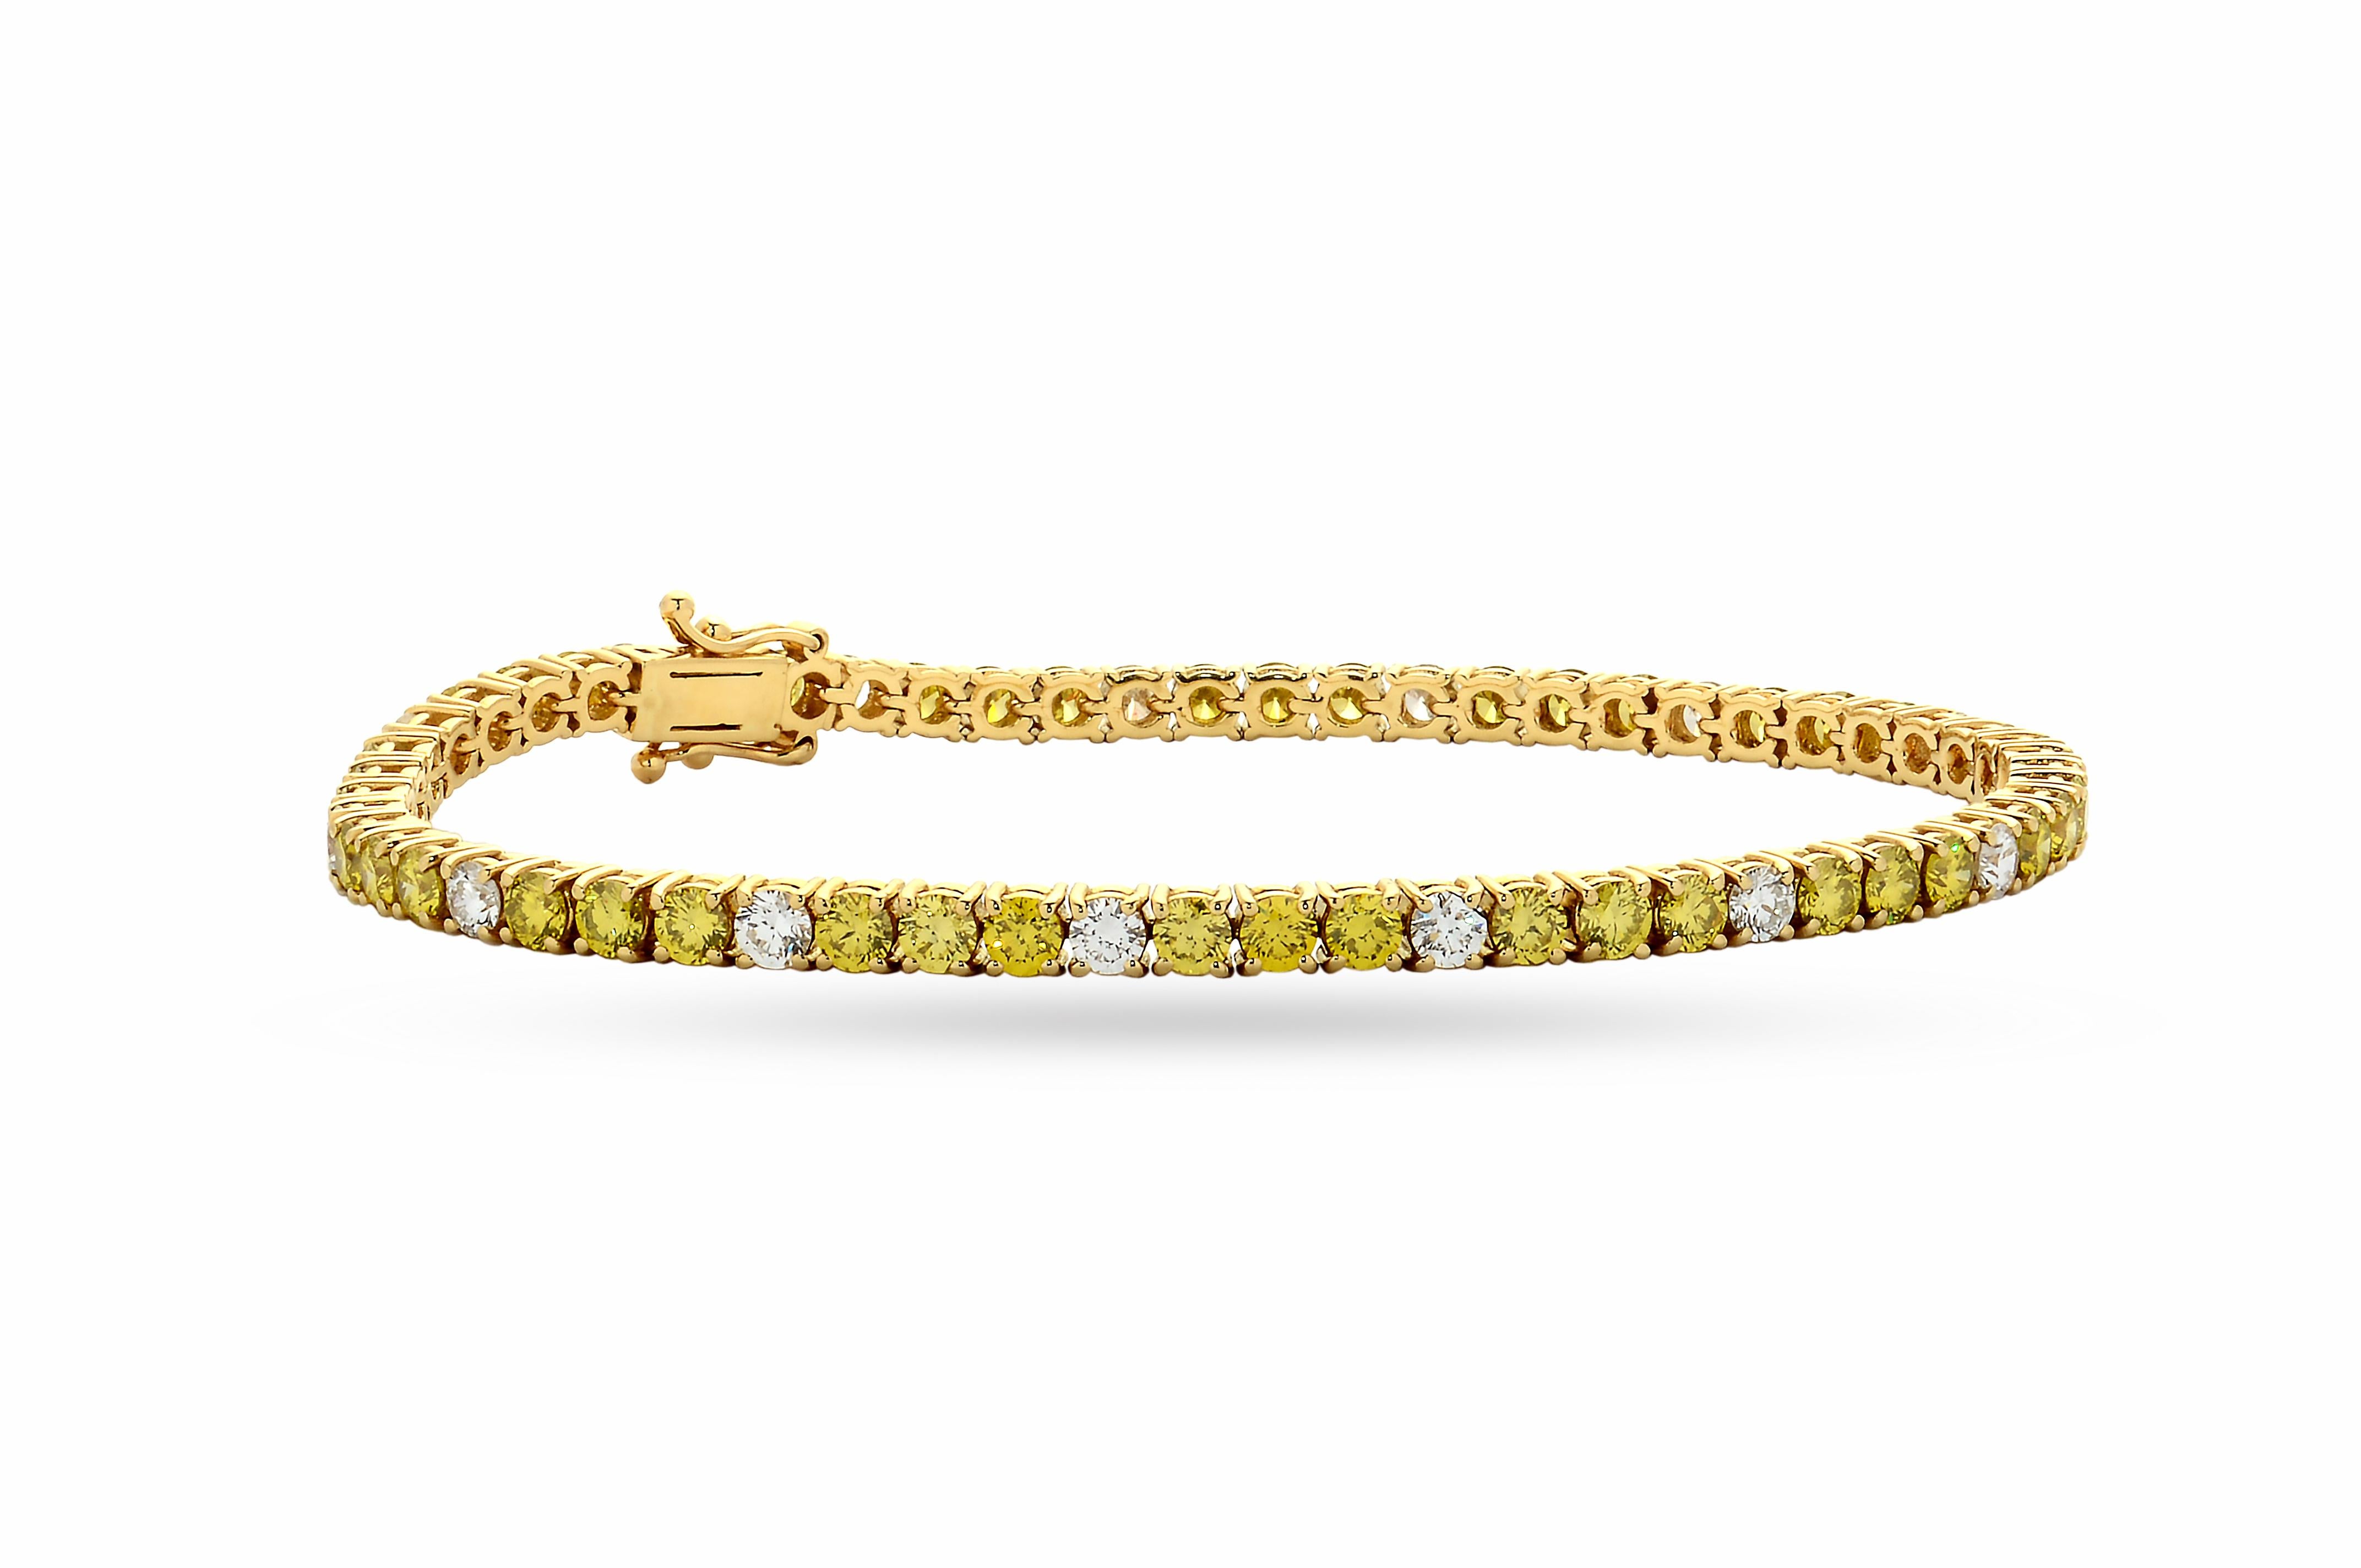 Stunning 18-karat yellow gold tennis bracelet with a total carat of 5.25ct mixed set with brilliant cut fancy yellow diamonds and brilliant cut natural white diamonds: color F/G, clarity V-S quality. 

This is a no turn riviera bracelet and has a